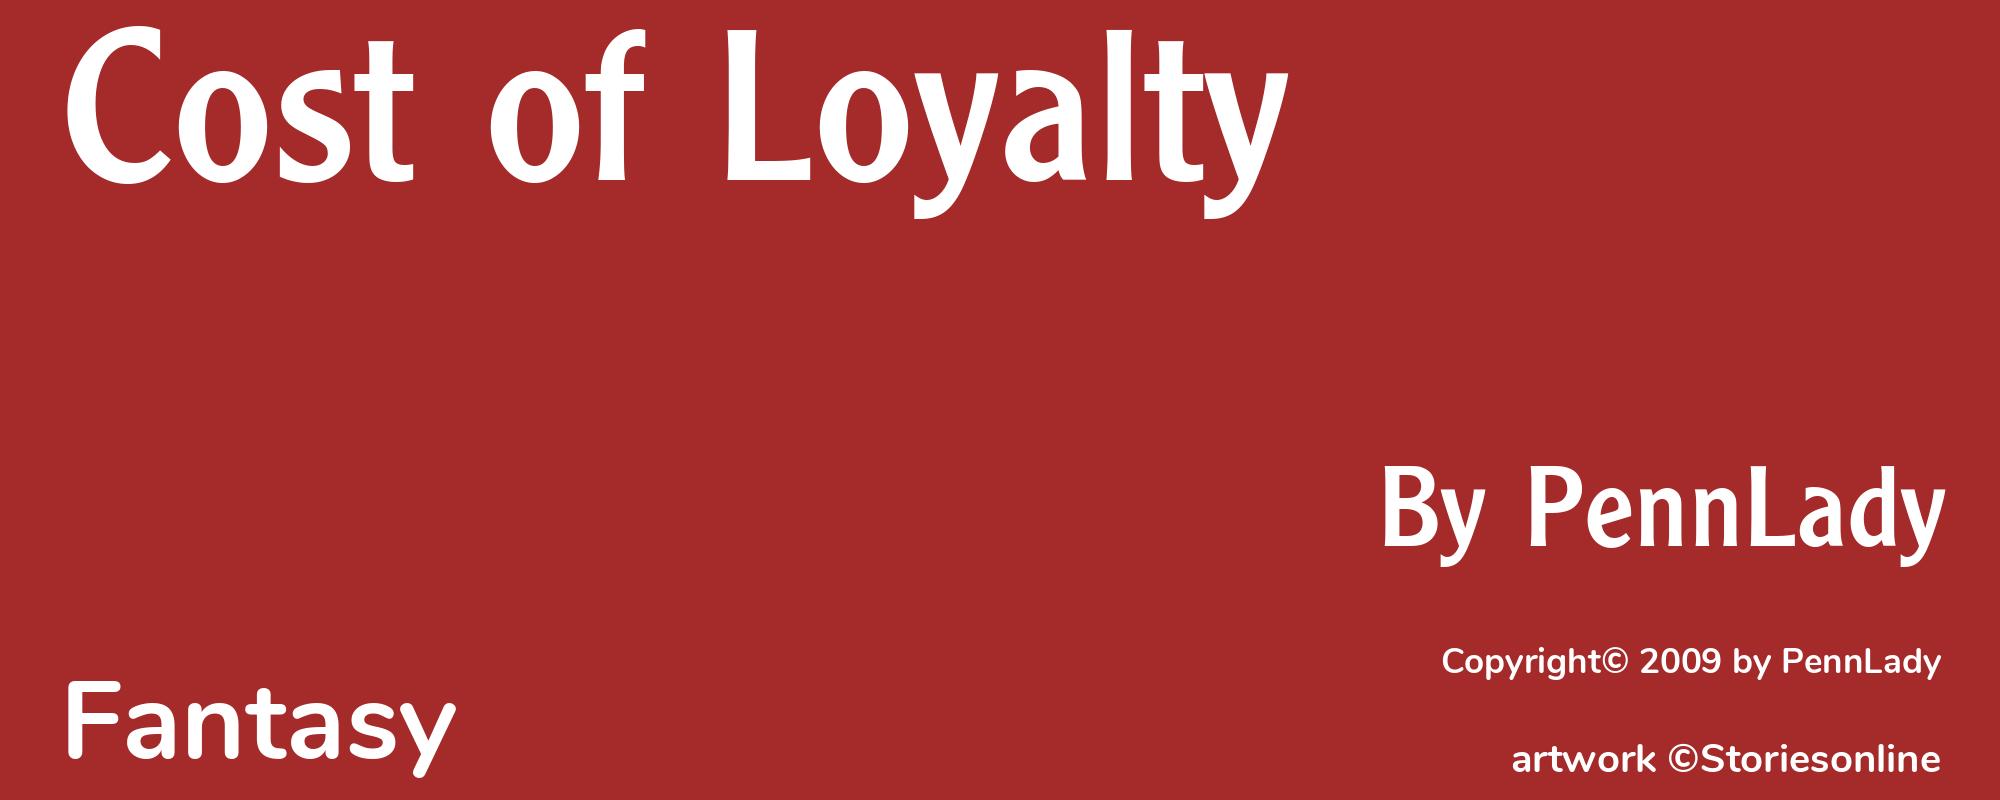 Cost of Loyalty - Cover